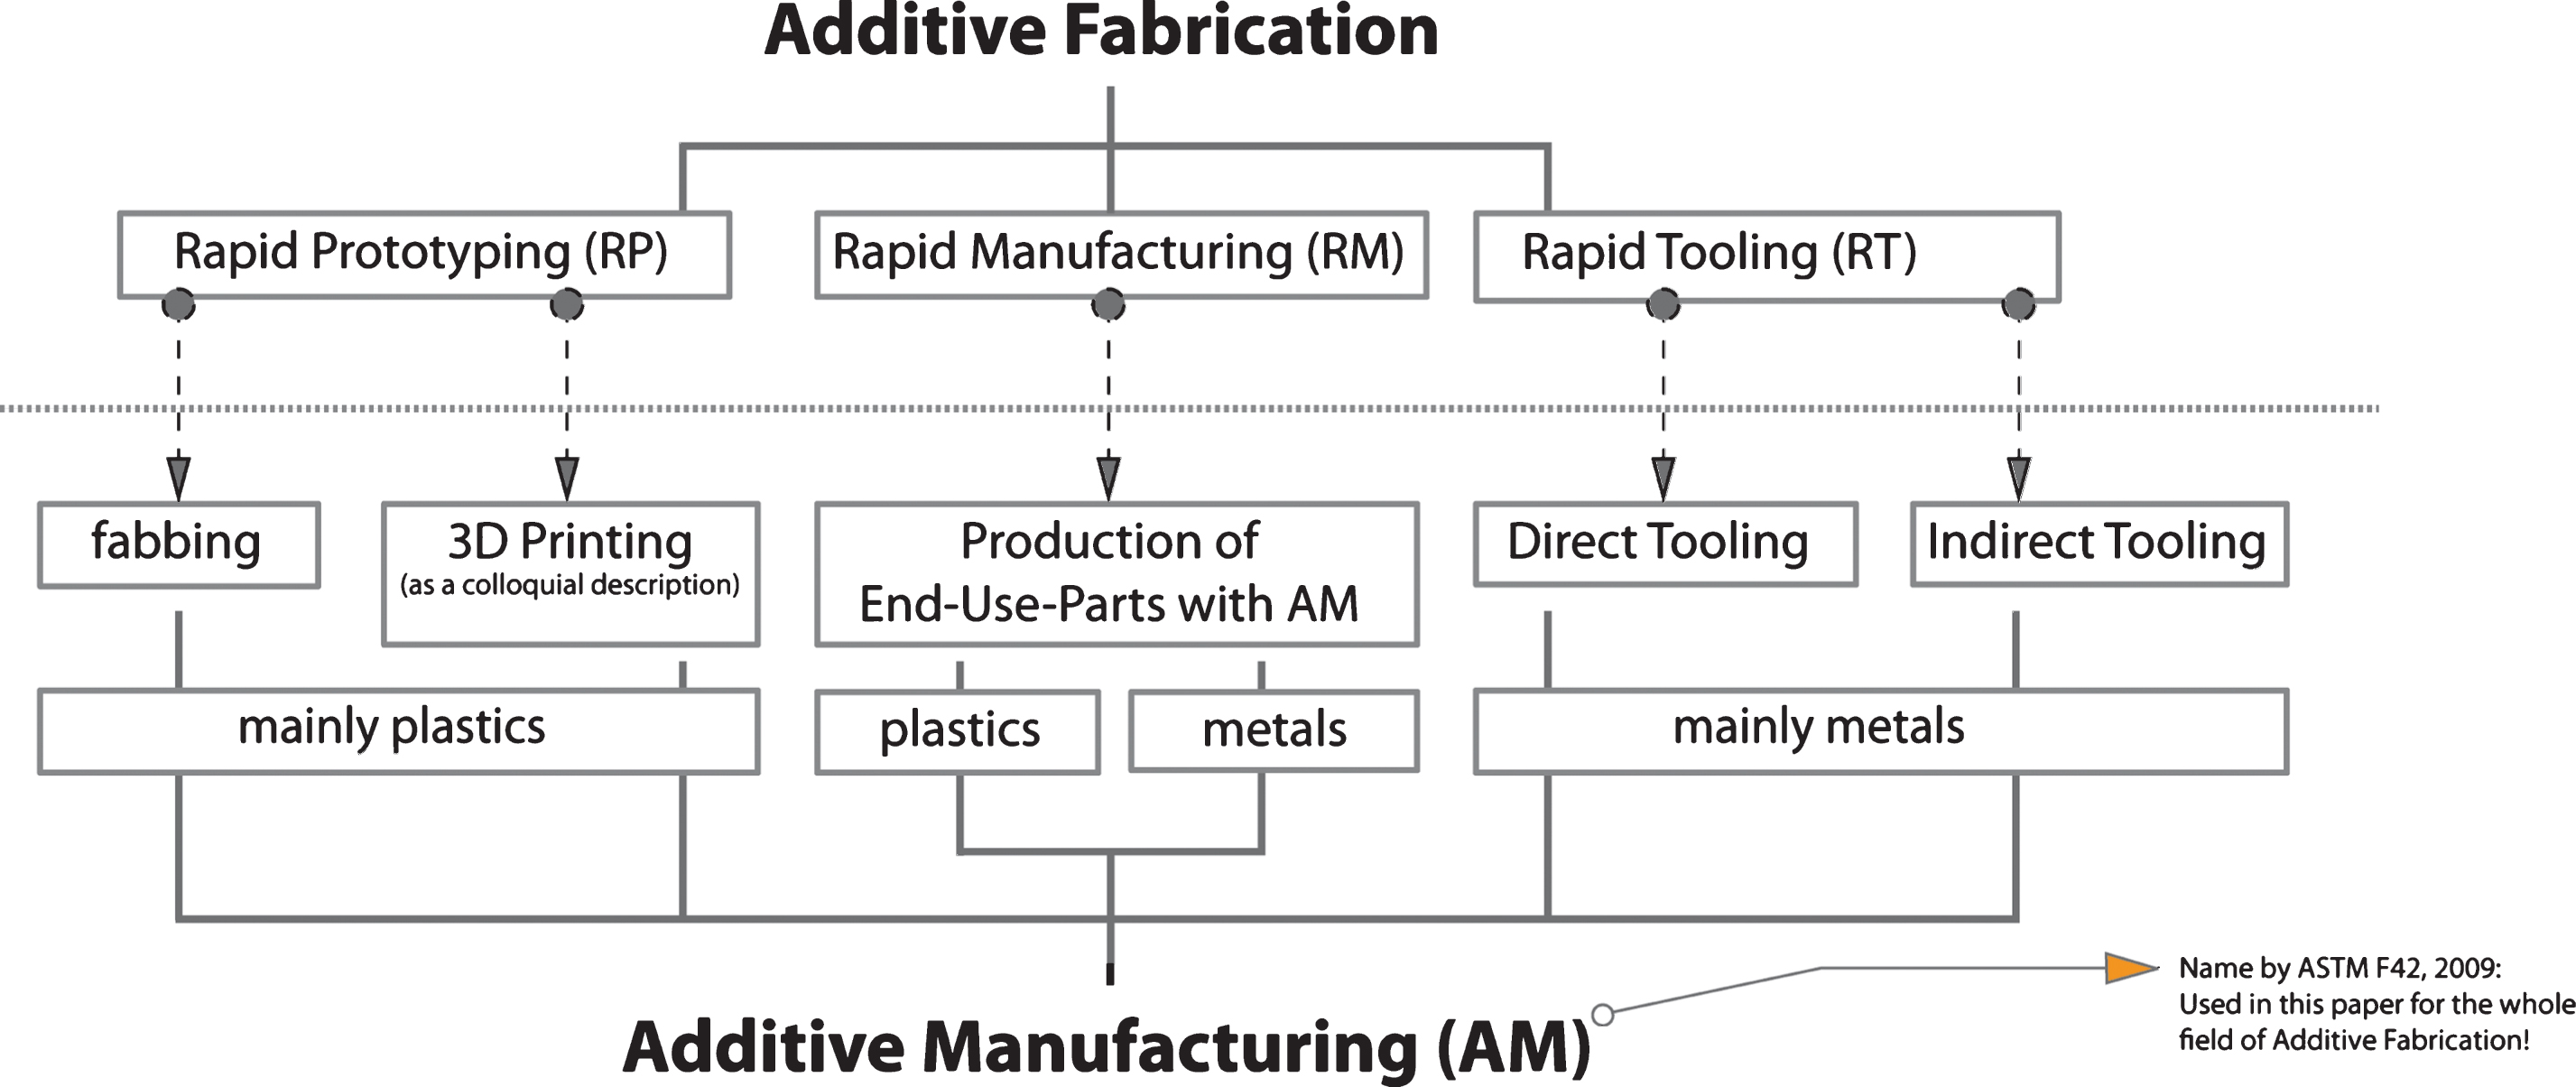 Overview ‘Additive Fabrication’; use and allocation of various terms for the different areas of the AM industry.